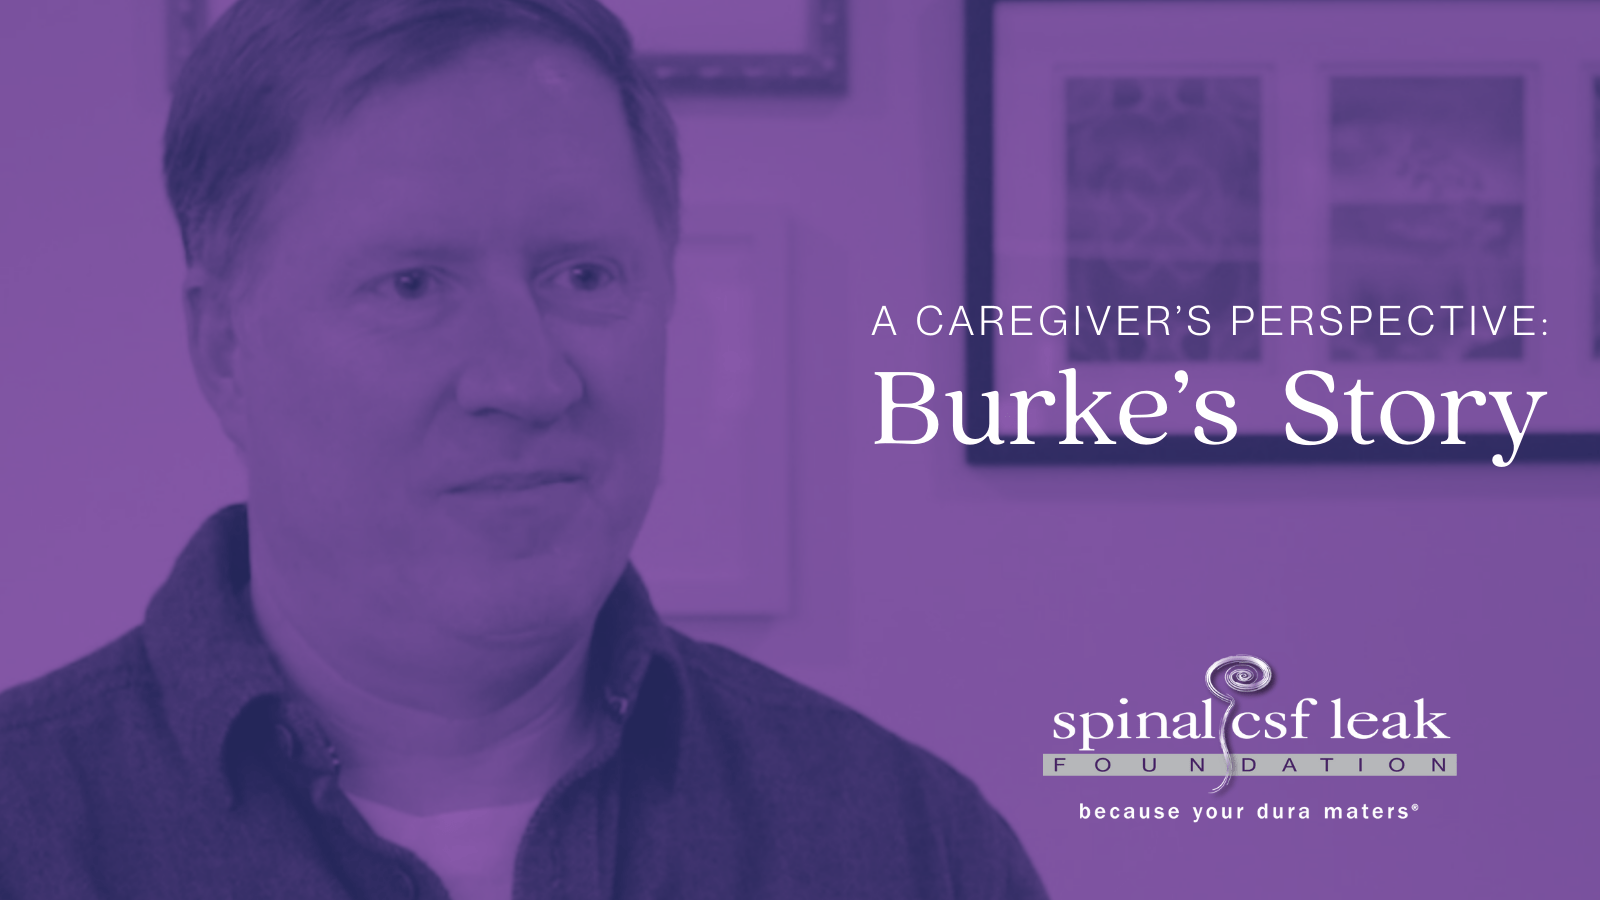 A Caregiver’s Perspective: Burke’s story